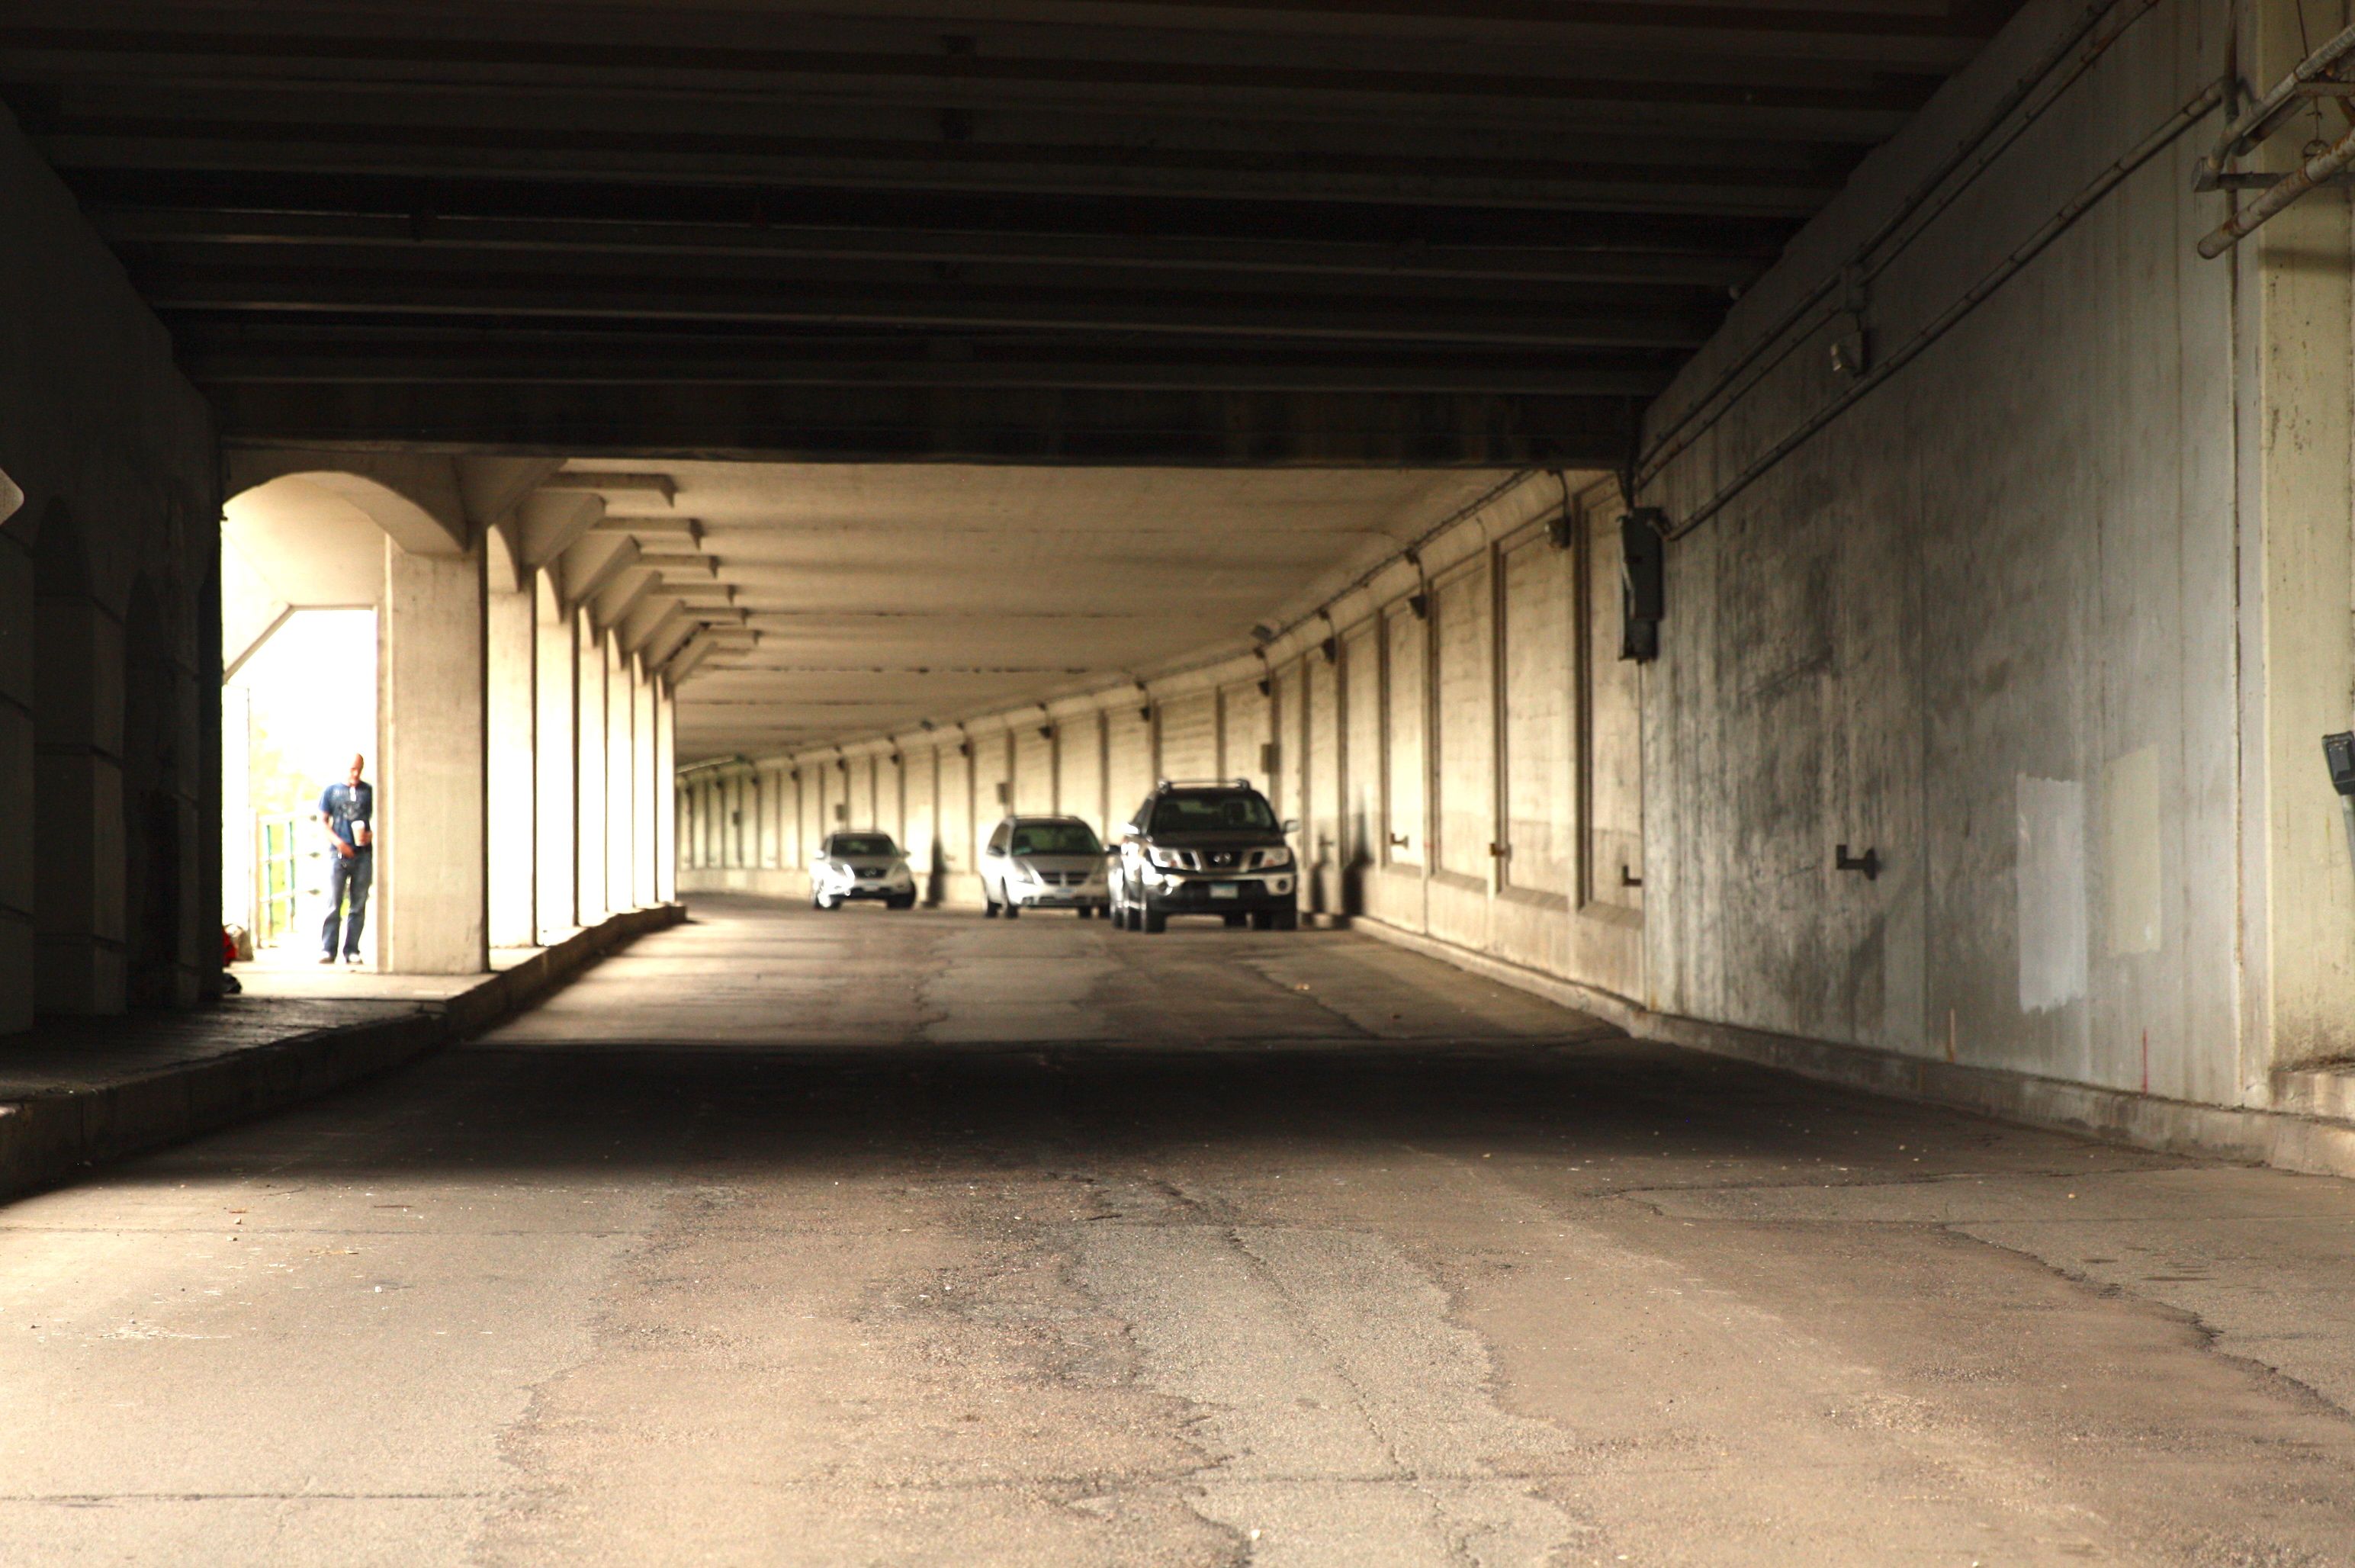 In reality, there is plenty light as 2nd Street passes under the viaduct.